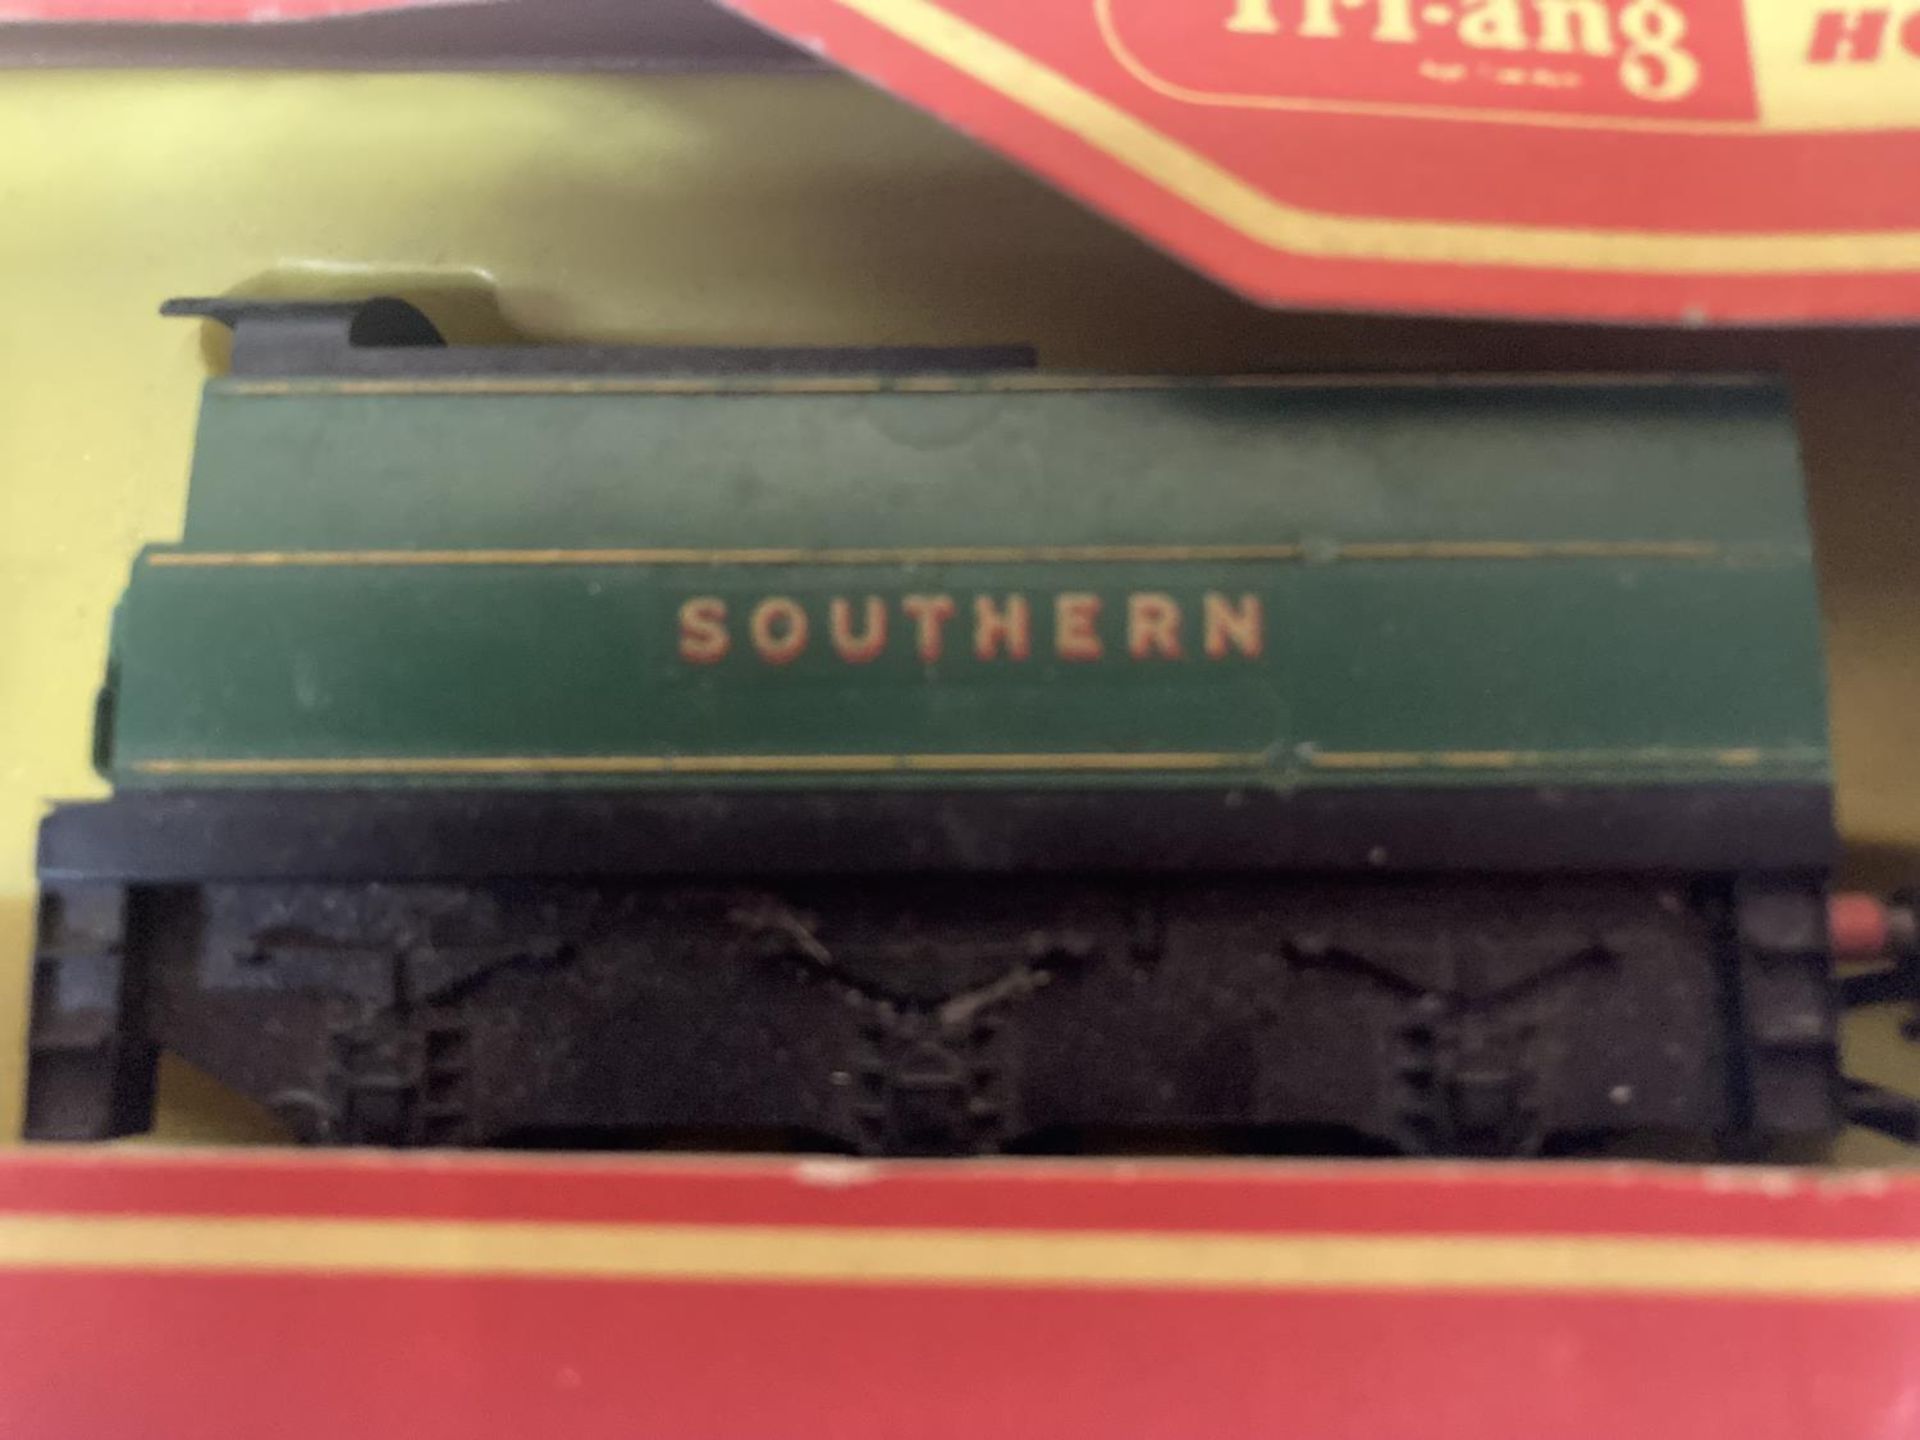 A TRI-ANG HORNBY MODEL OF SOUTHERN GOLDEN ARROW 4-6-2 LOCOMOTIVE WINSTON CHURCHILL IN BOX - Image 2 of 6